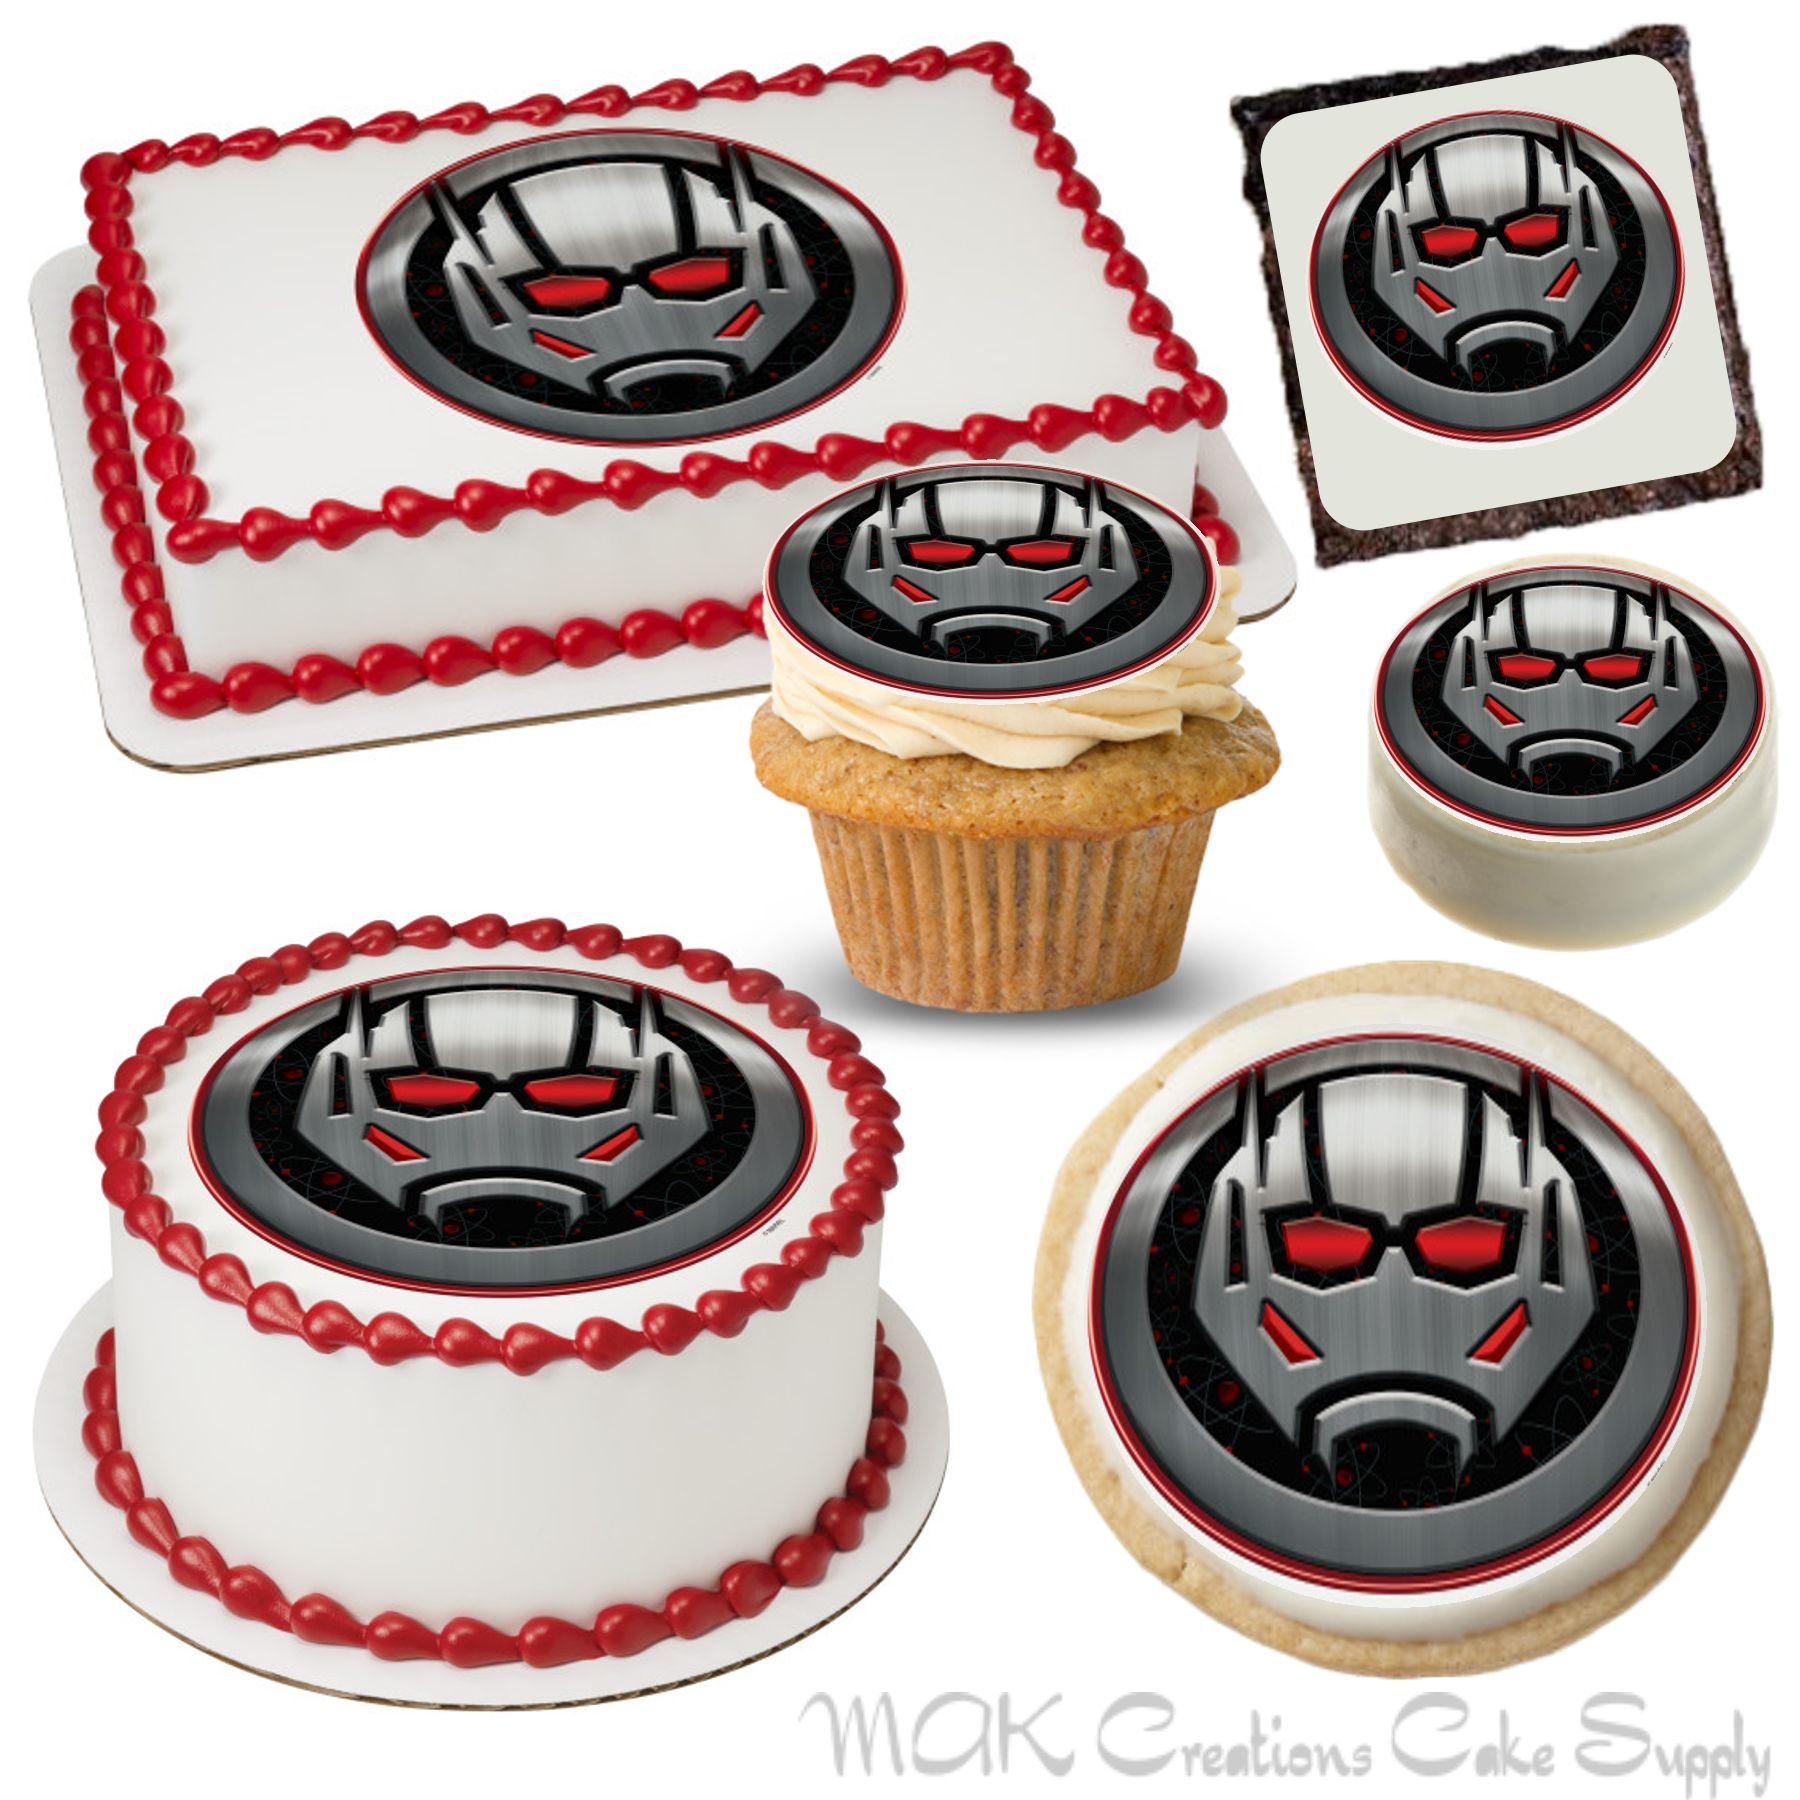 30x Ant Man Marvel Avengers Edible Icing Cake Toppers 35mm Cupcake Decorating